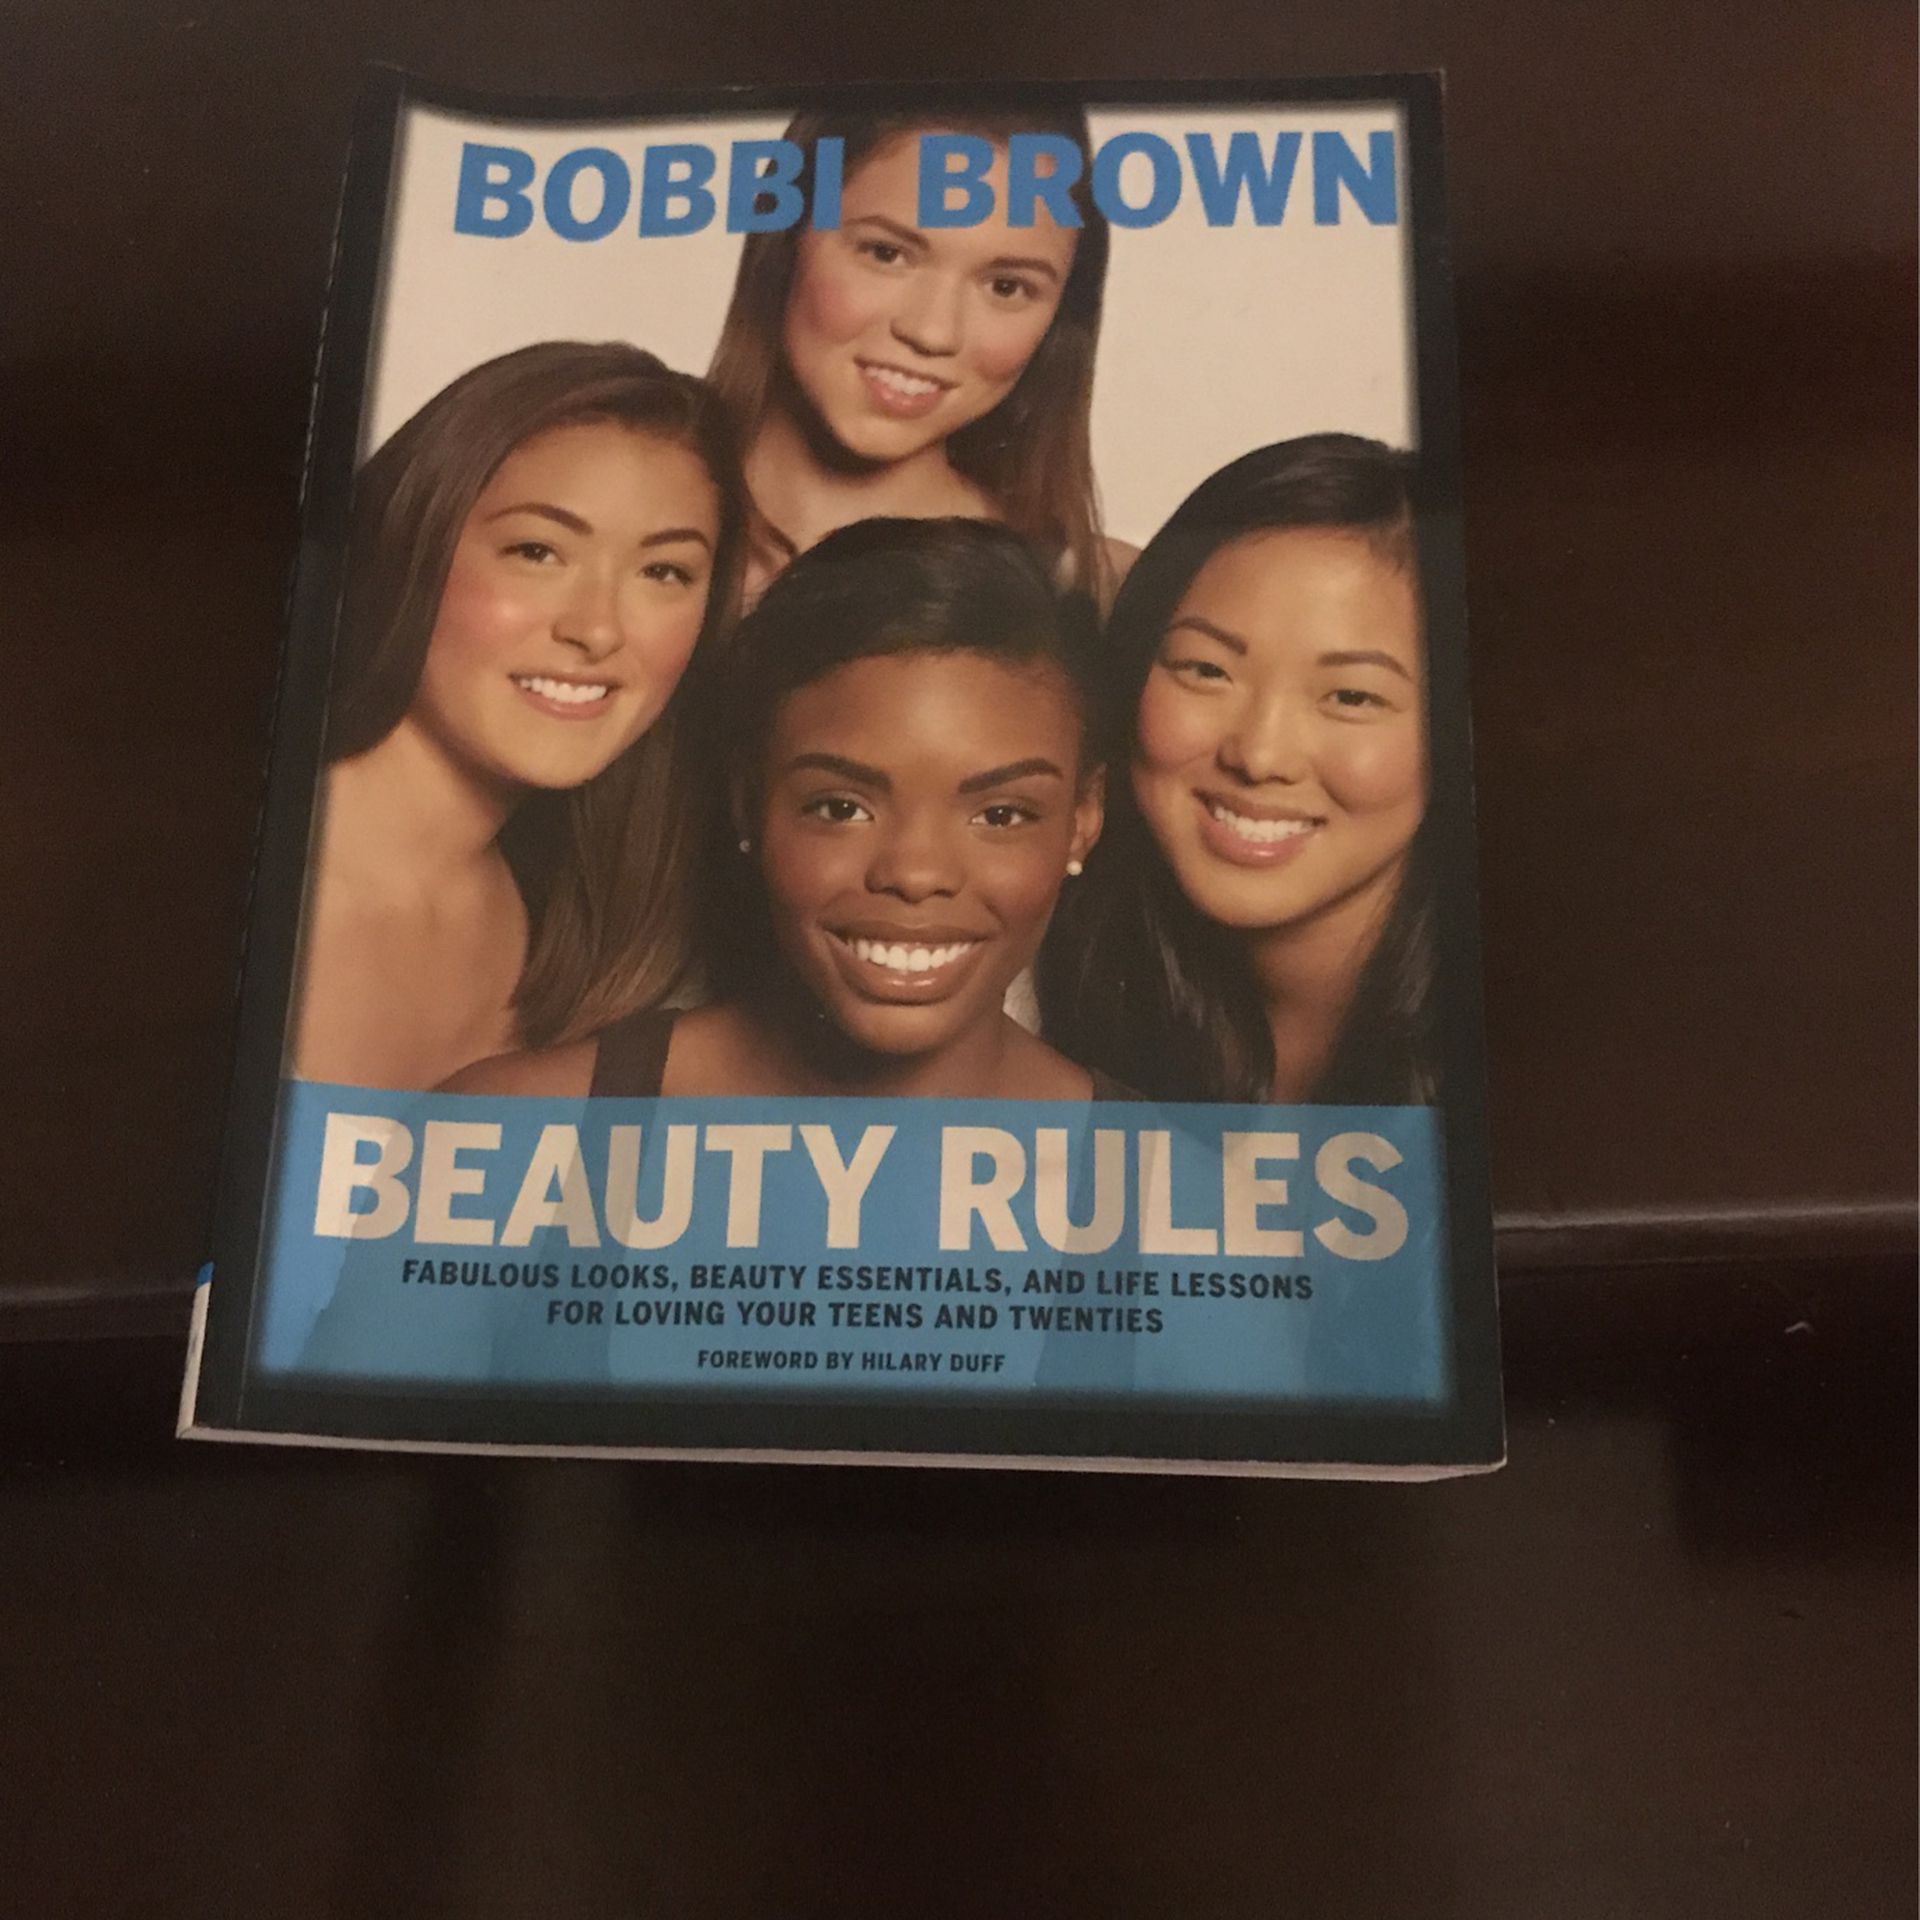 Brown　for　Rules　NEW　OfferUp　Bobbi　WA　Beauty　Sale　in　Olympia,